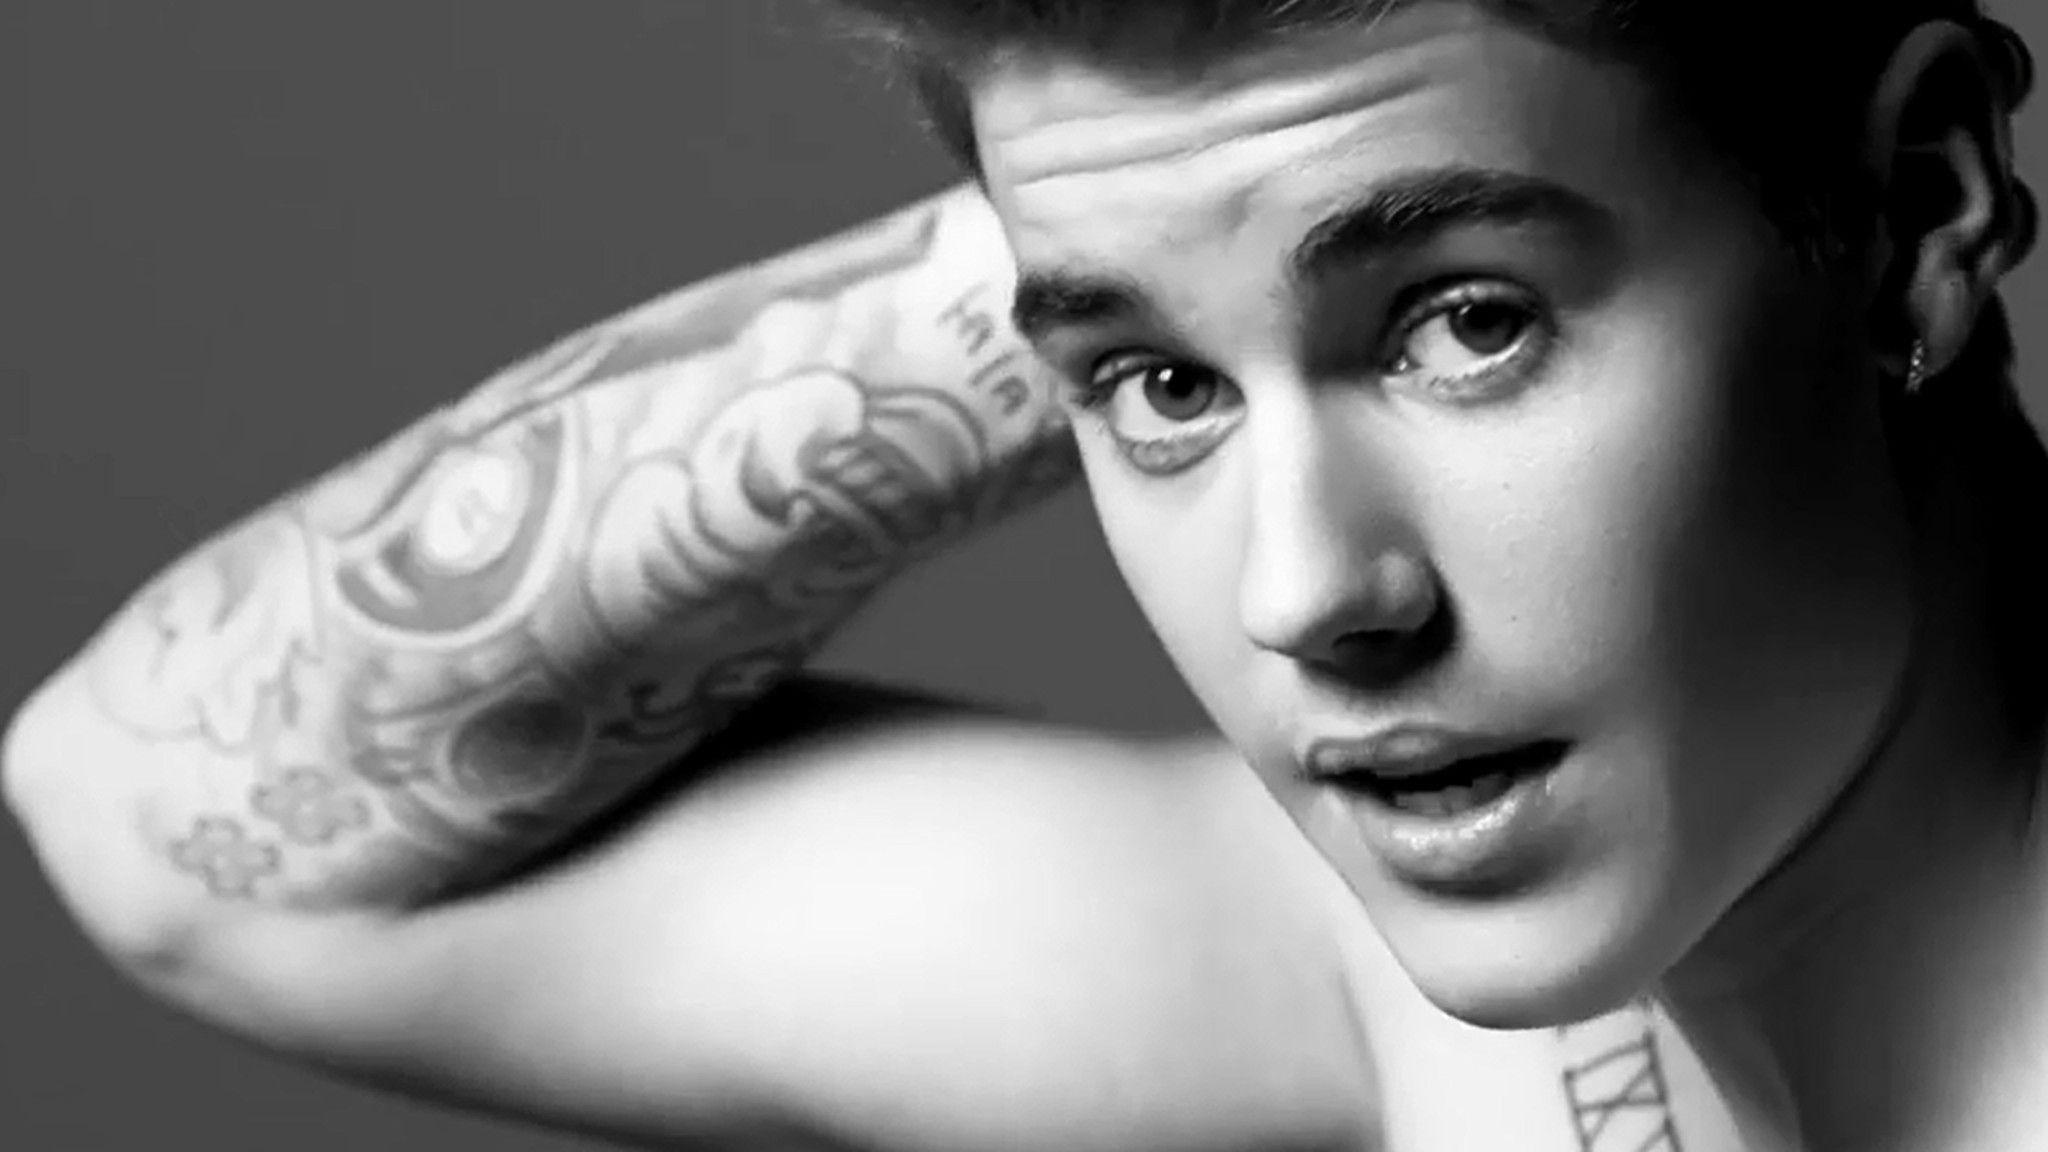 Free Download Wallpapers Of Justin Bieber 2017 [2048x1152] For Your